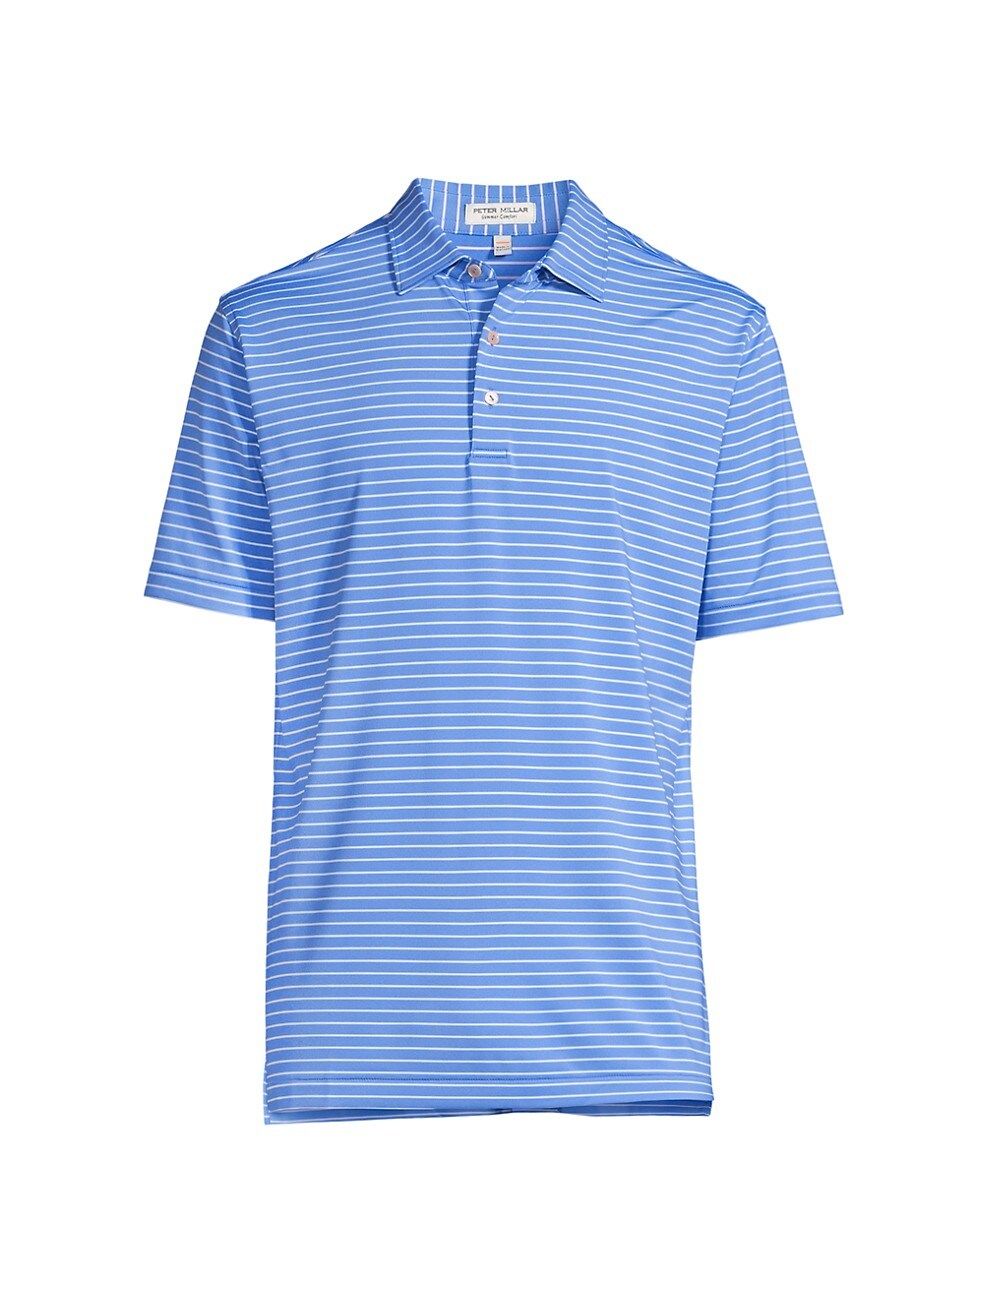 Crown Sport Drum Performance Jersey Polo Shirt | Saks Fifth Avenue